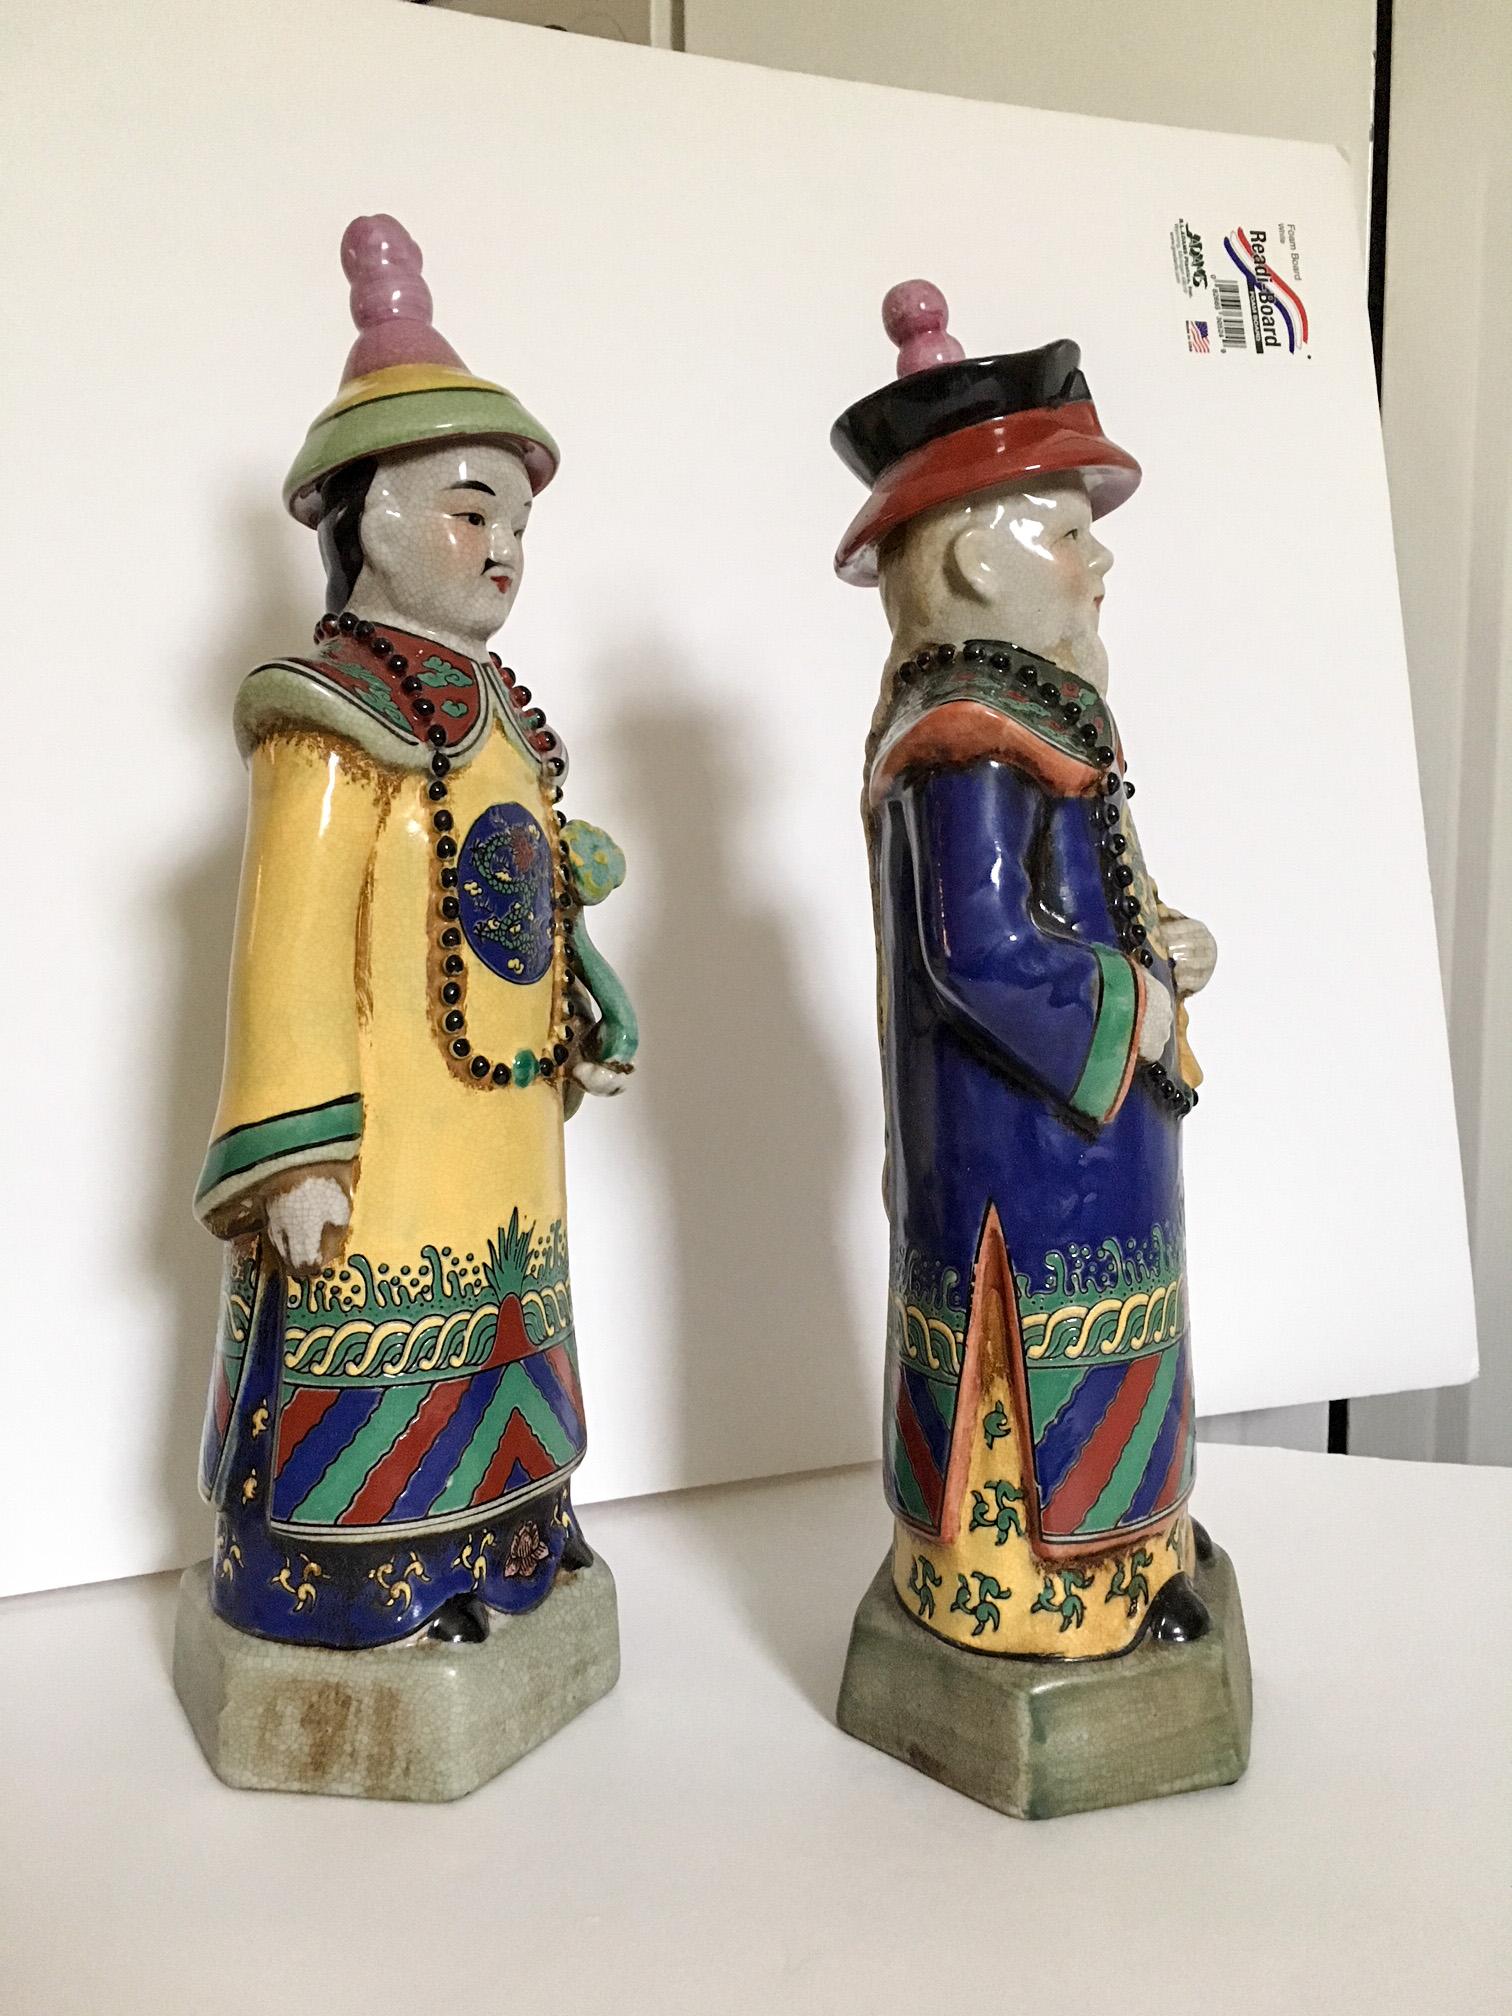 Large-scale pair of ceramic polychrome Chinese emperor statues beautifully detailed and hand painted. Measures: Left figure, 14.75